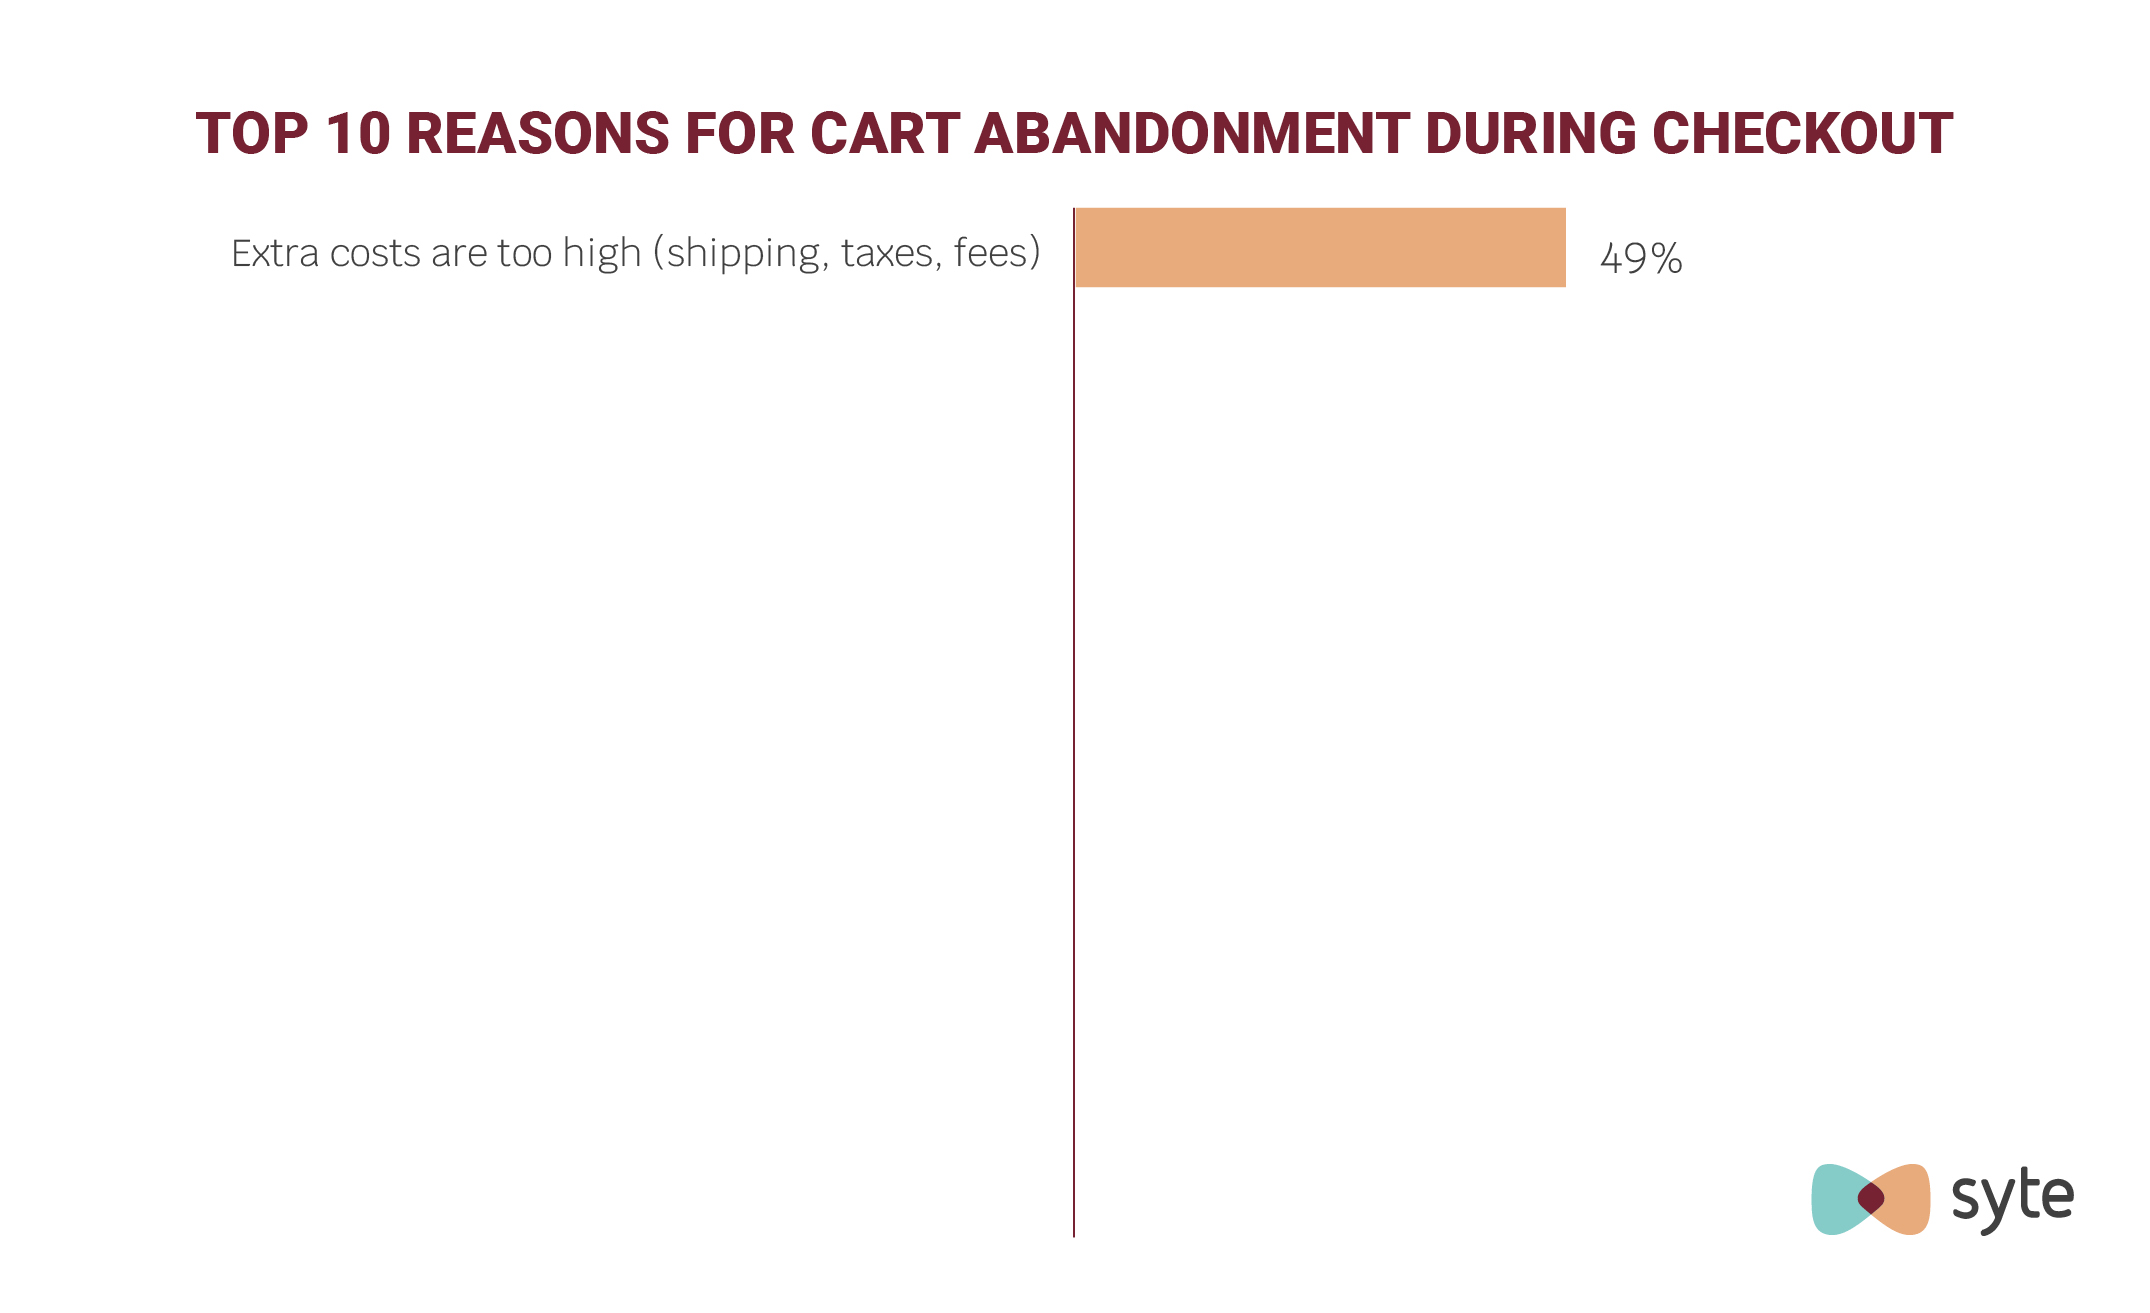 Top 10 reasons for shopping cart abandonment during checkout